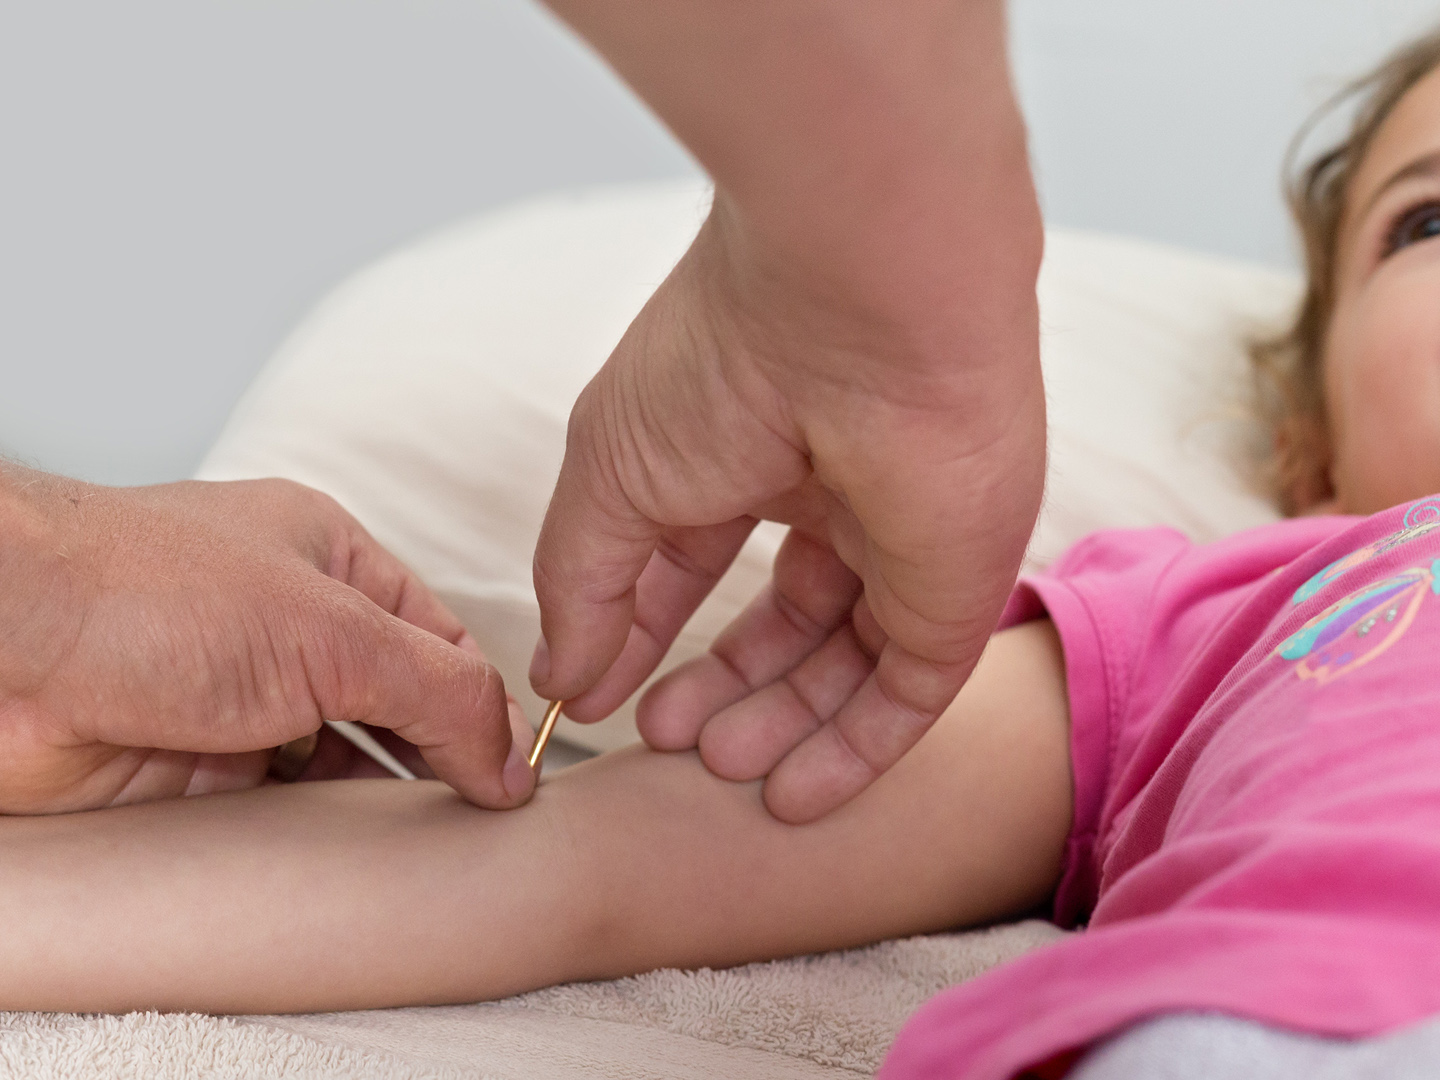 Child having points stimulated during an Acupuncture Session.  The style being used was Japanese Acupuncture called Toyohari.  The tool in the picture is called Teishin.